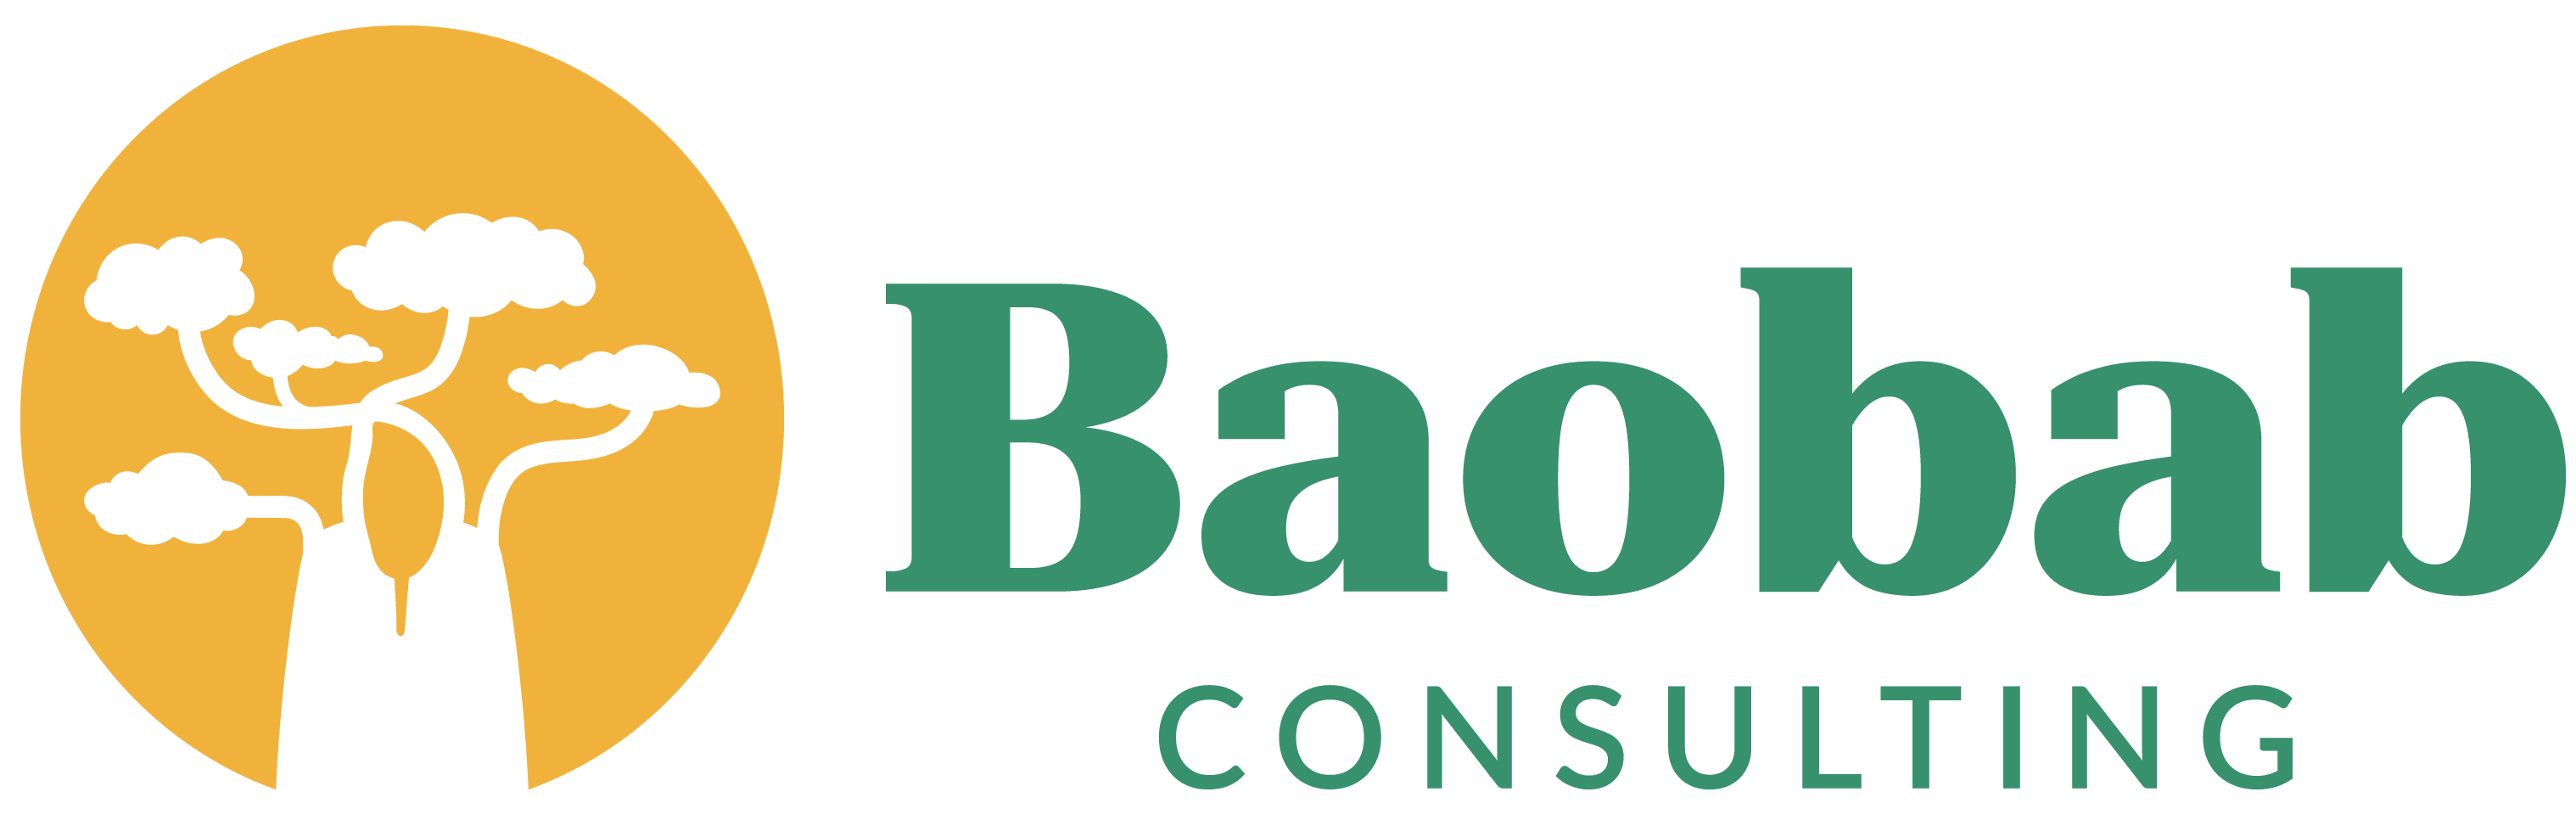 Baobab Consulting